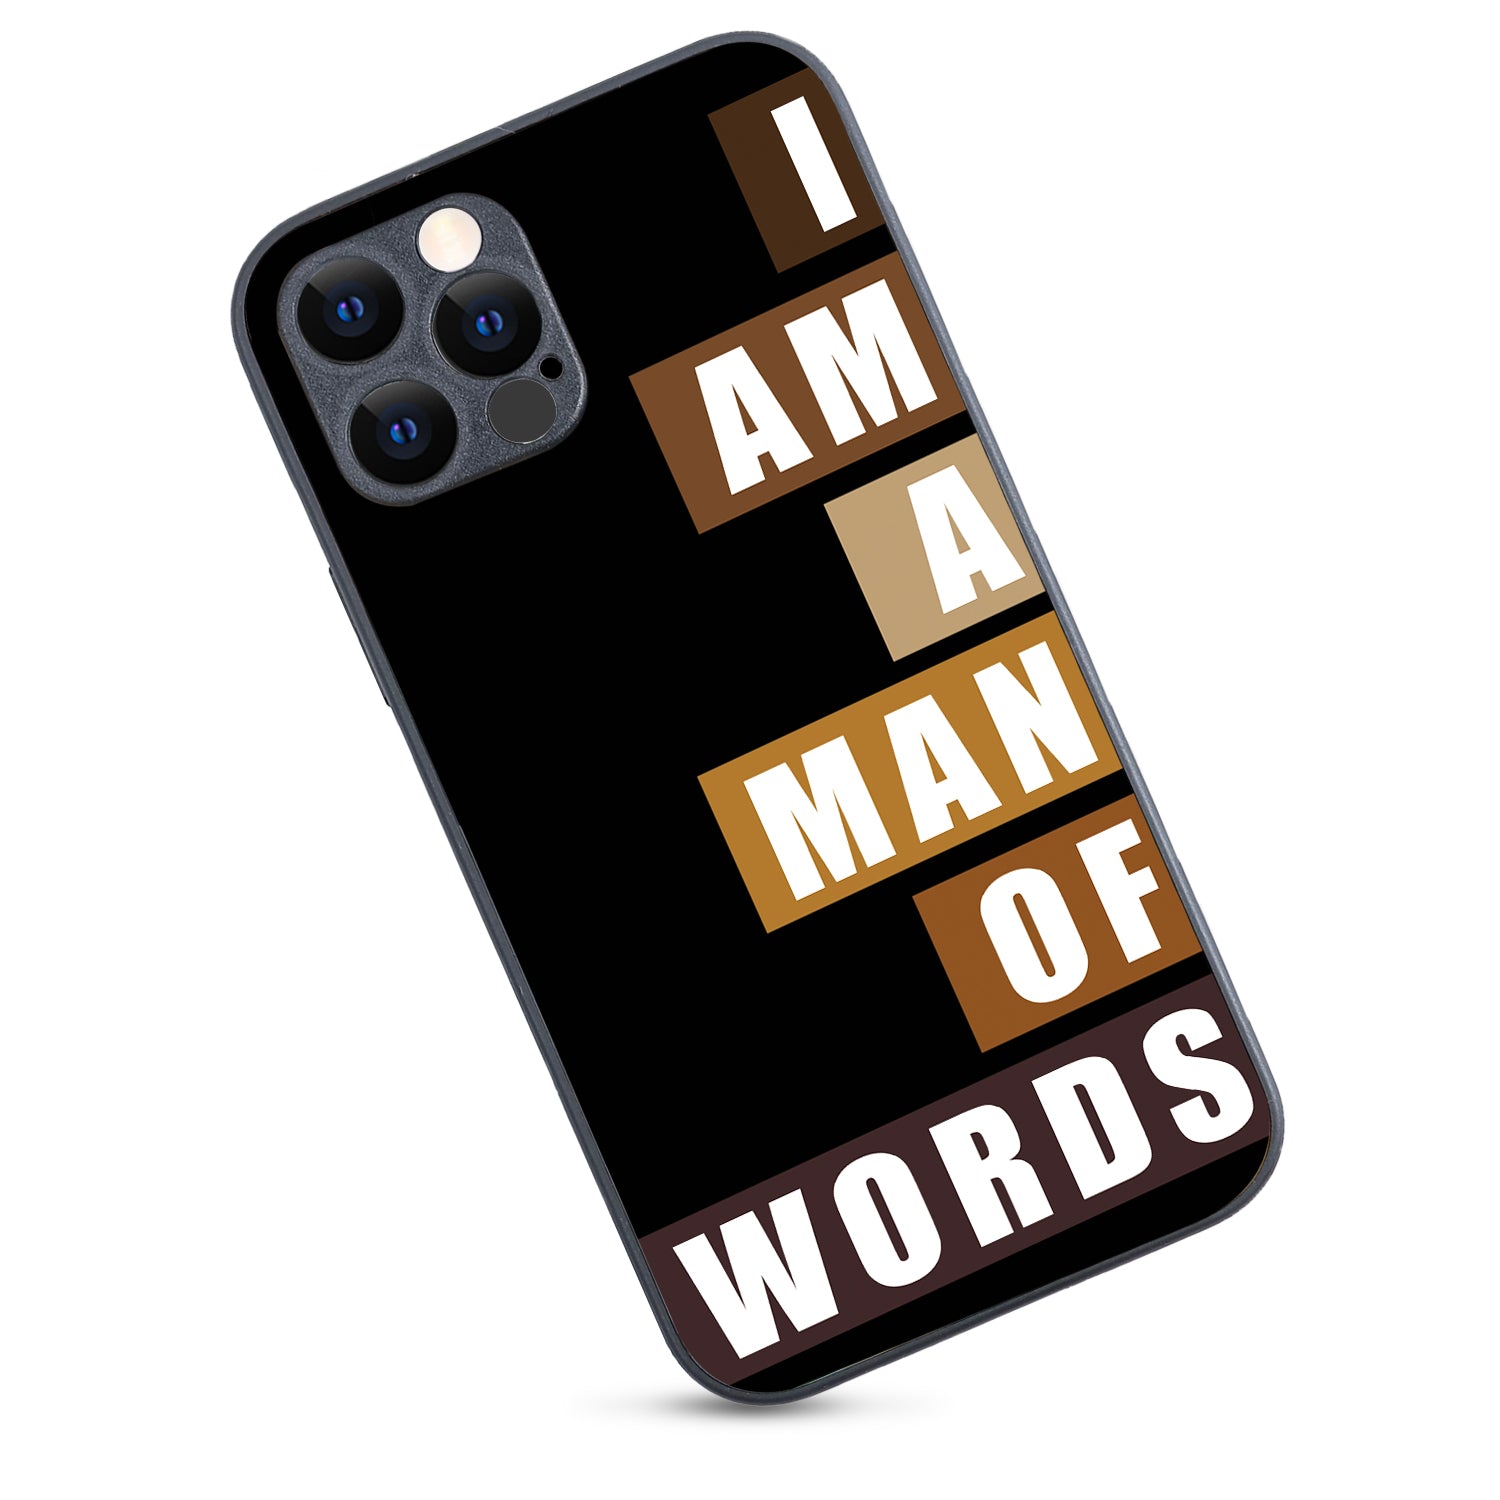 I Am A Man Of Words Motivational Quotes iPhone 12 Pro Case